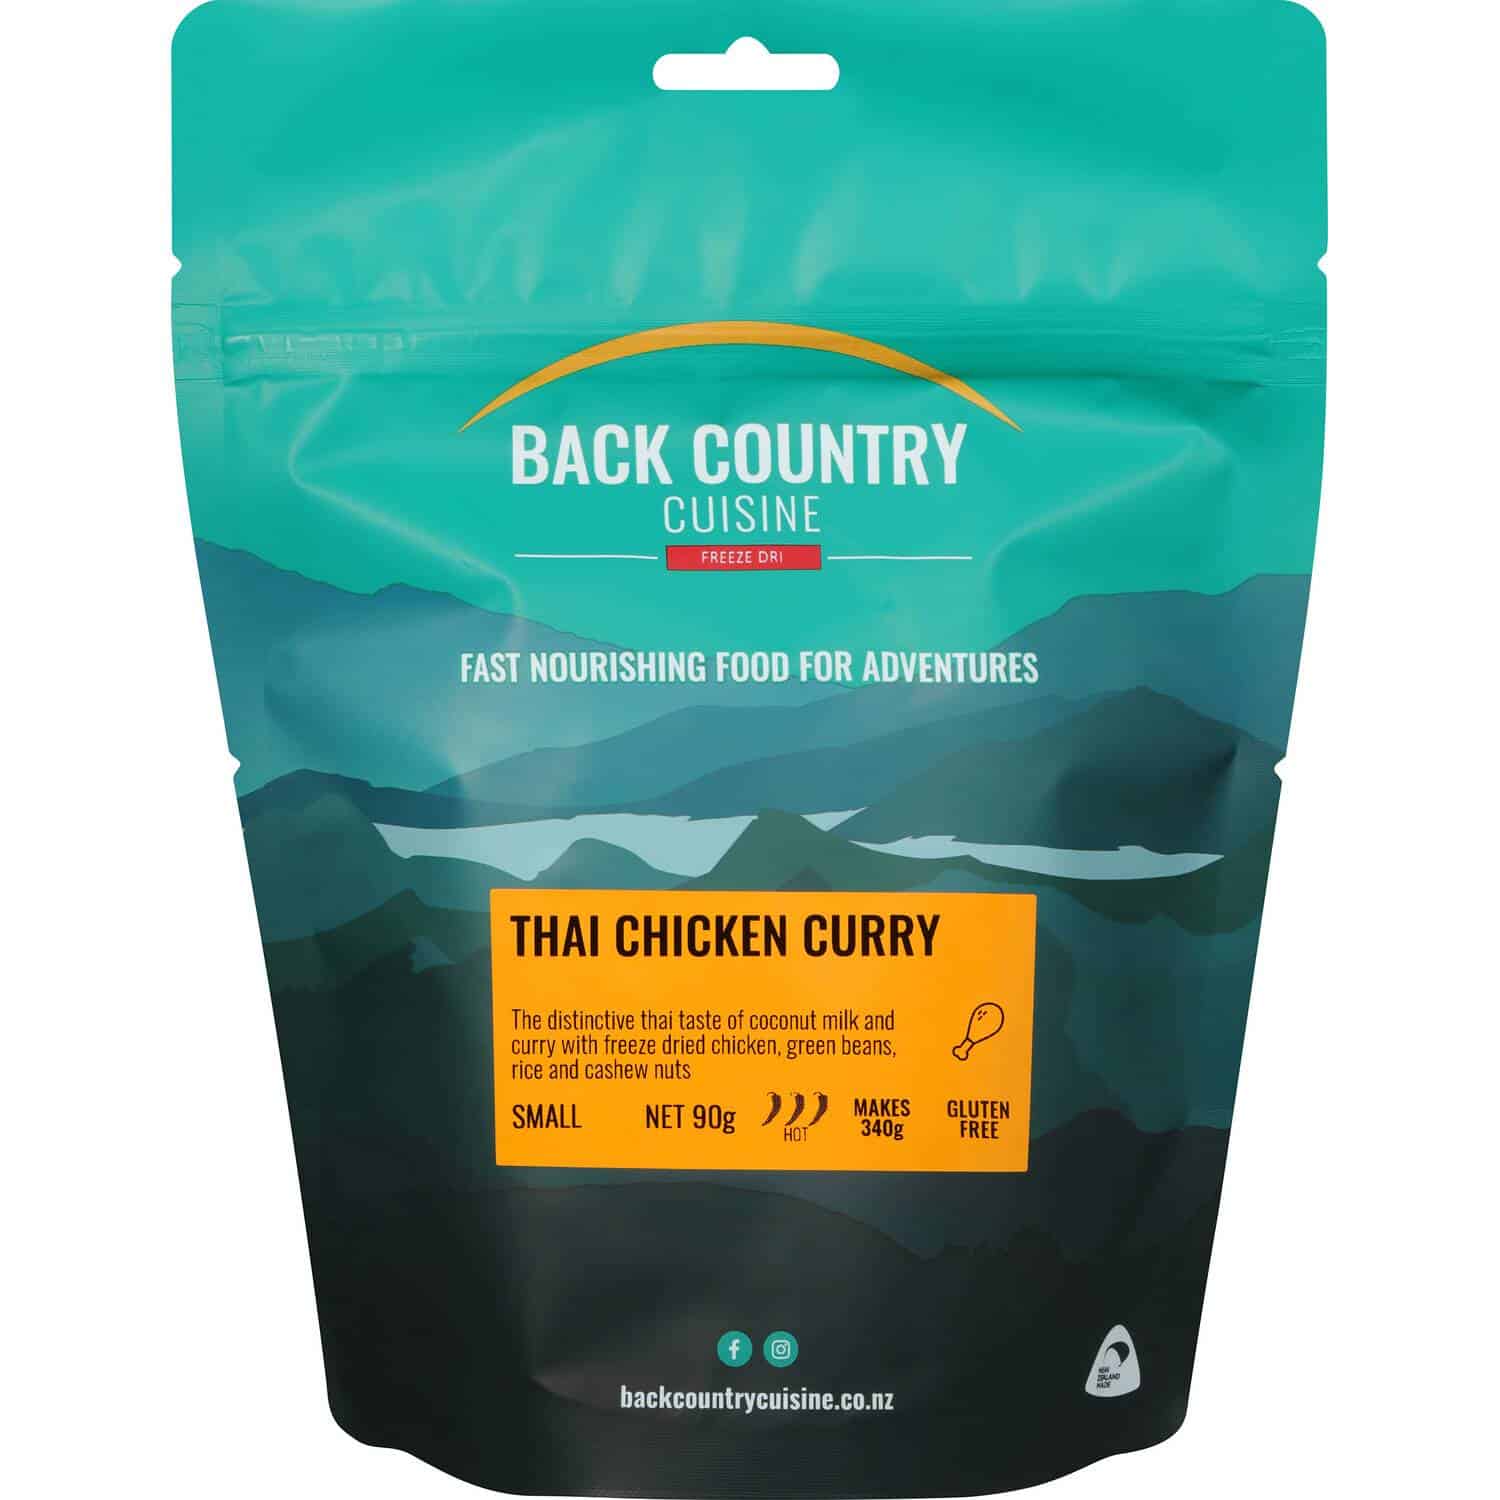 Back Country Cuisine Thai Chicken Curry Small - Tramping Food and Accessories sold by Venture Outdoors NZ